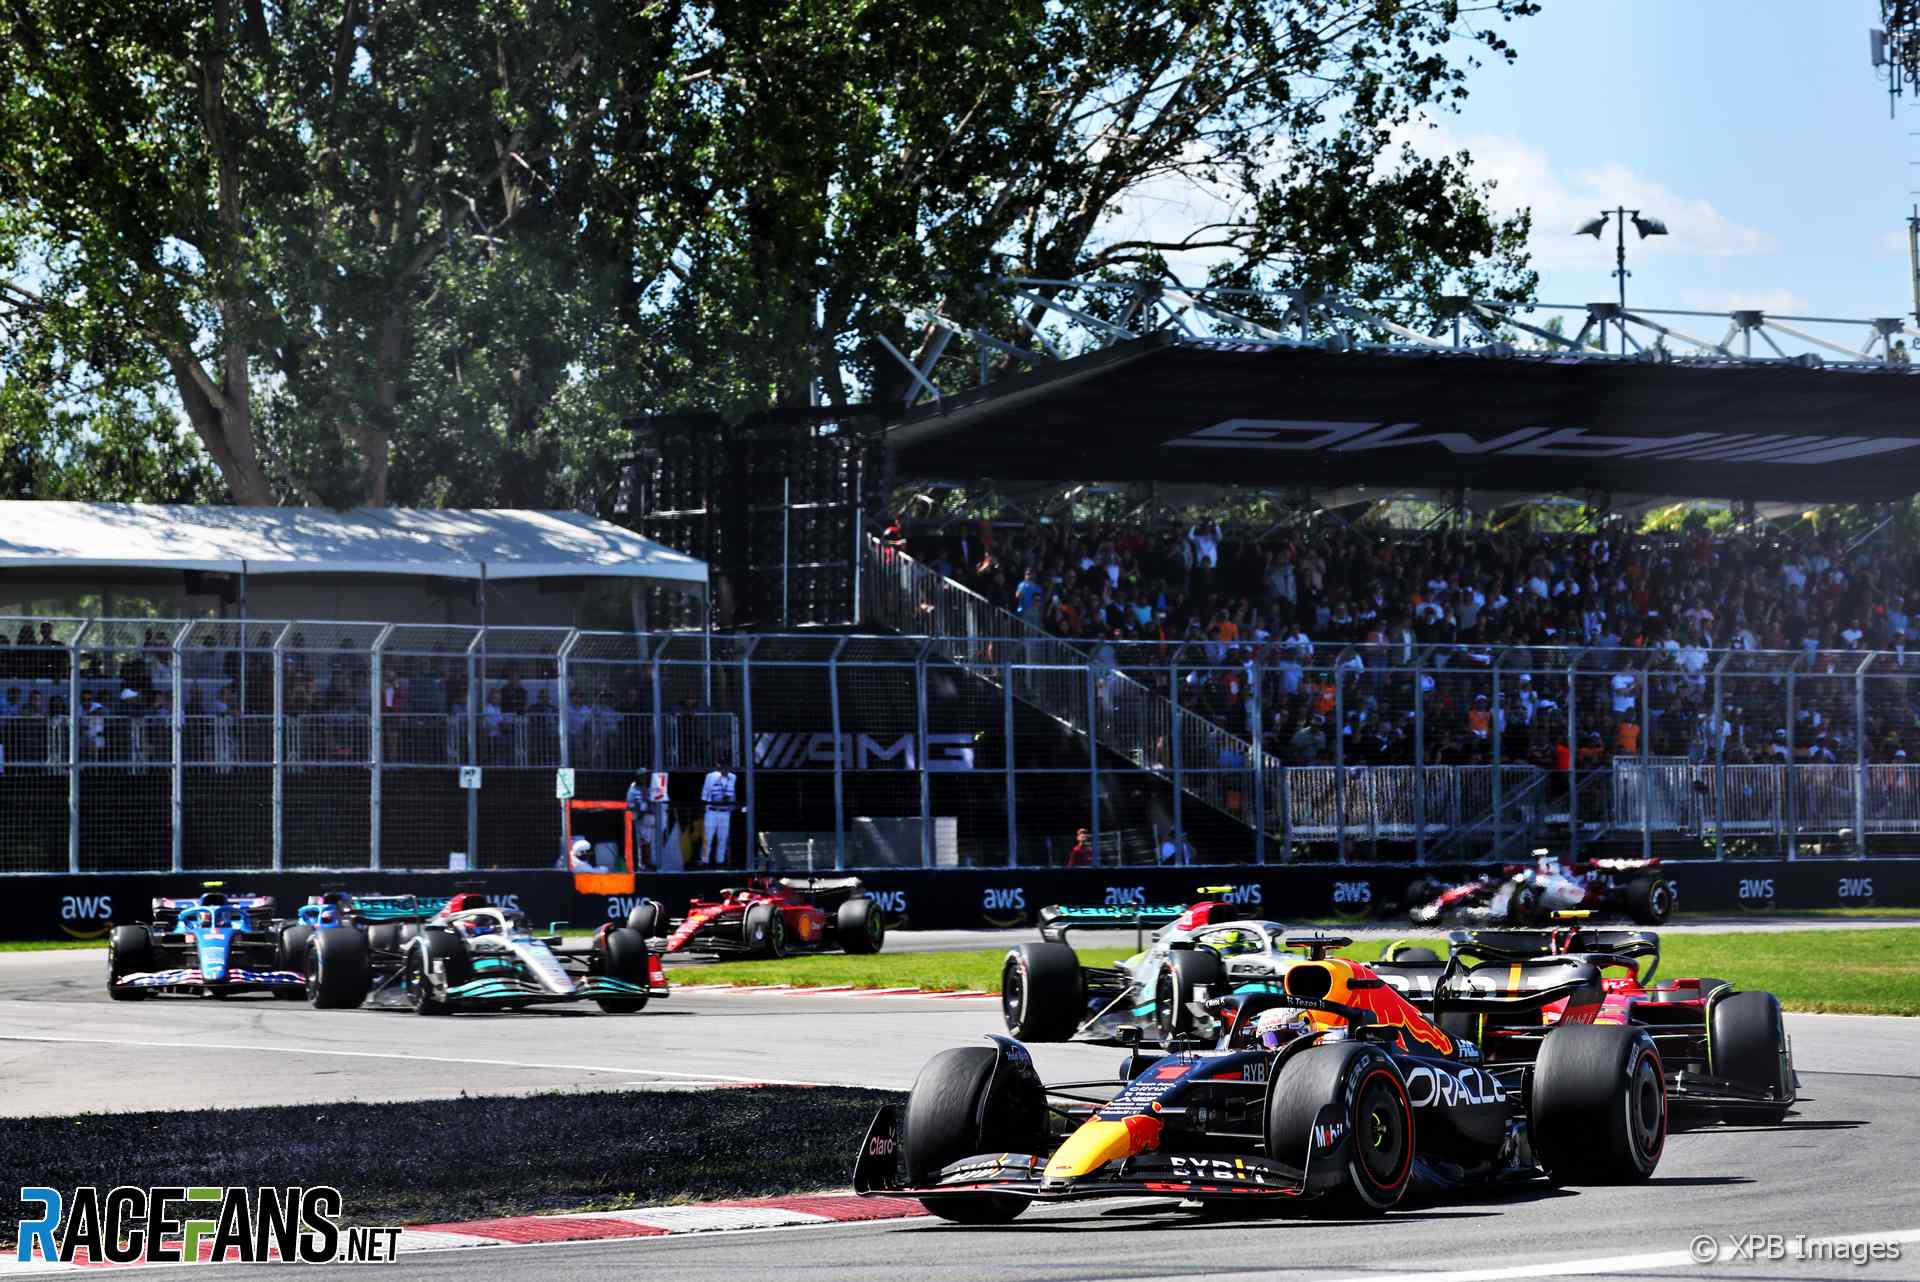 The 2022 Canadian Grand Prix was held at Circuit Gilles Villeneuve and won by Max Verstappen